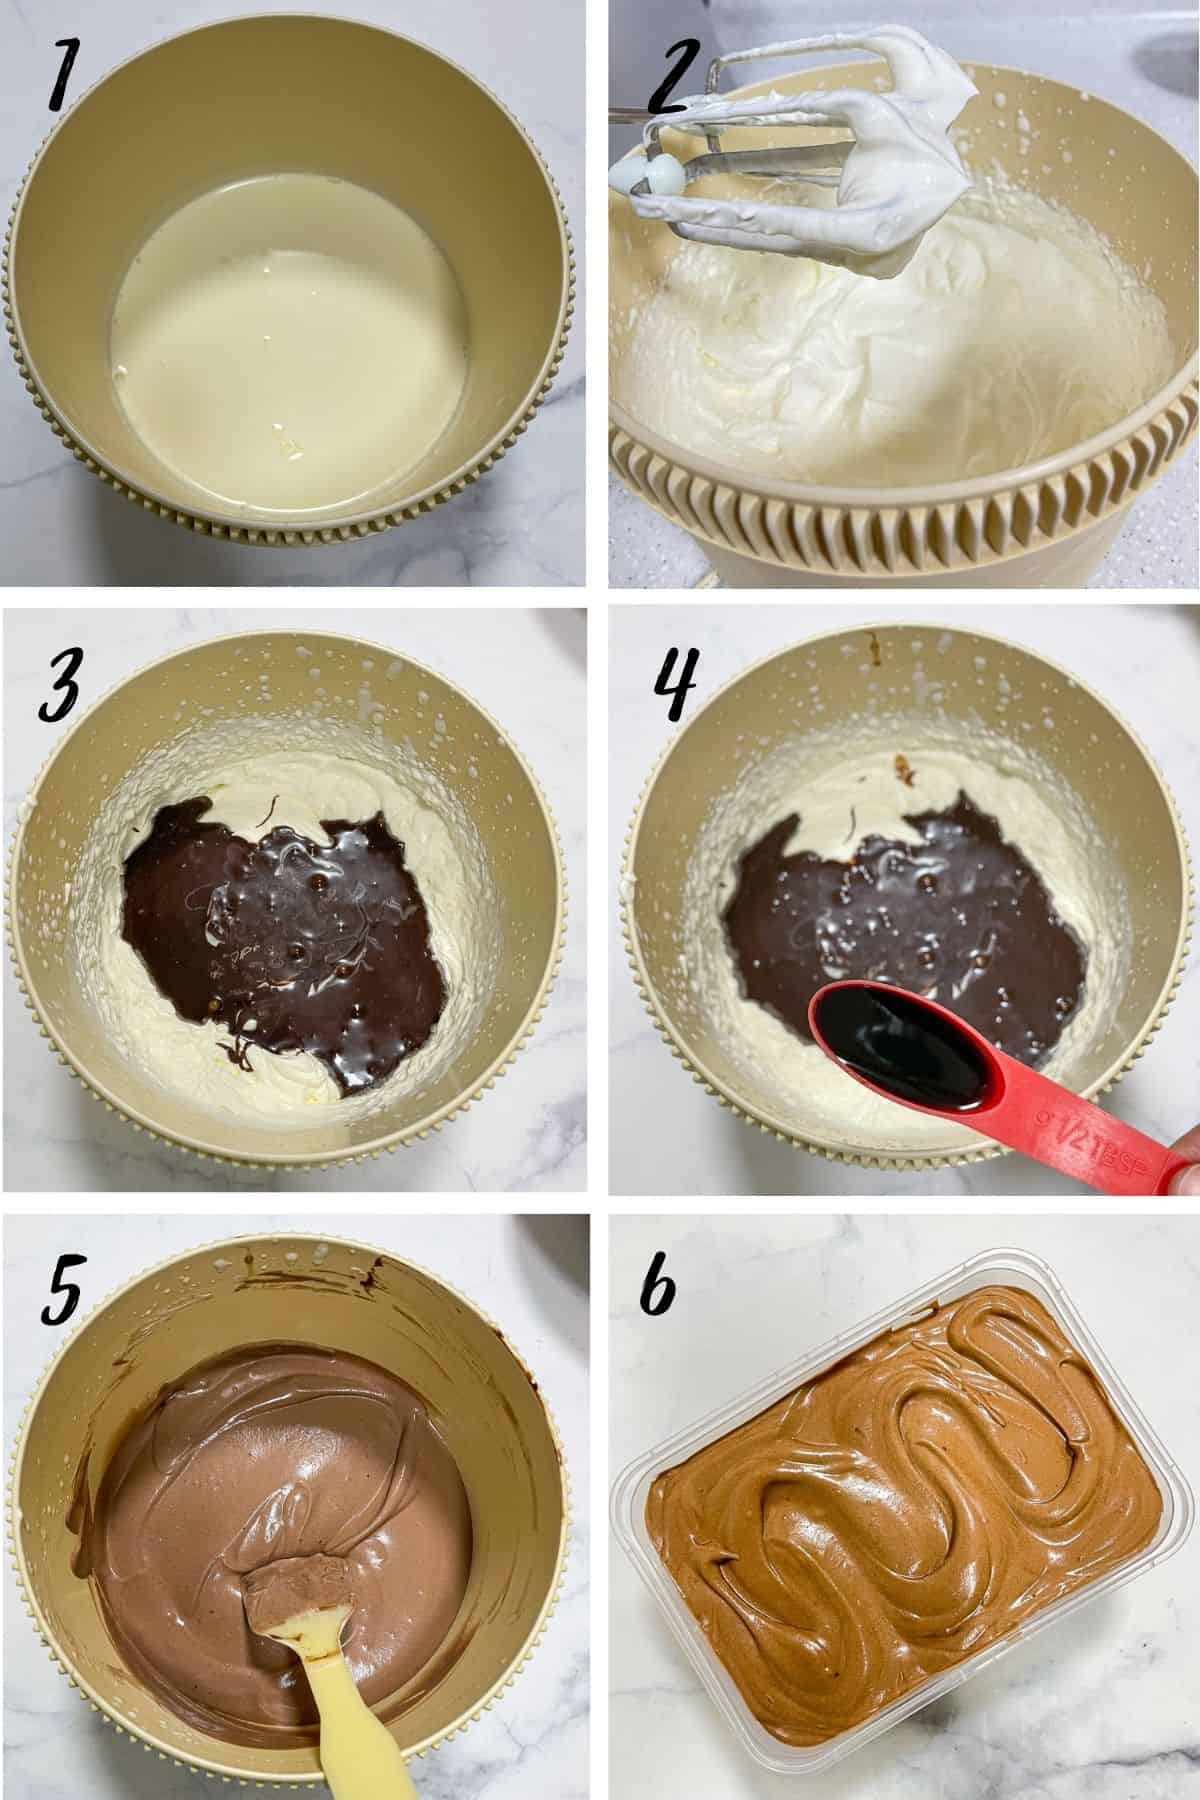 A poster of 6 images showing how to whip cream, mix it with condensed milk and chocolate to make no-churn chocolate ice cream